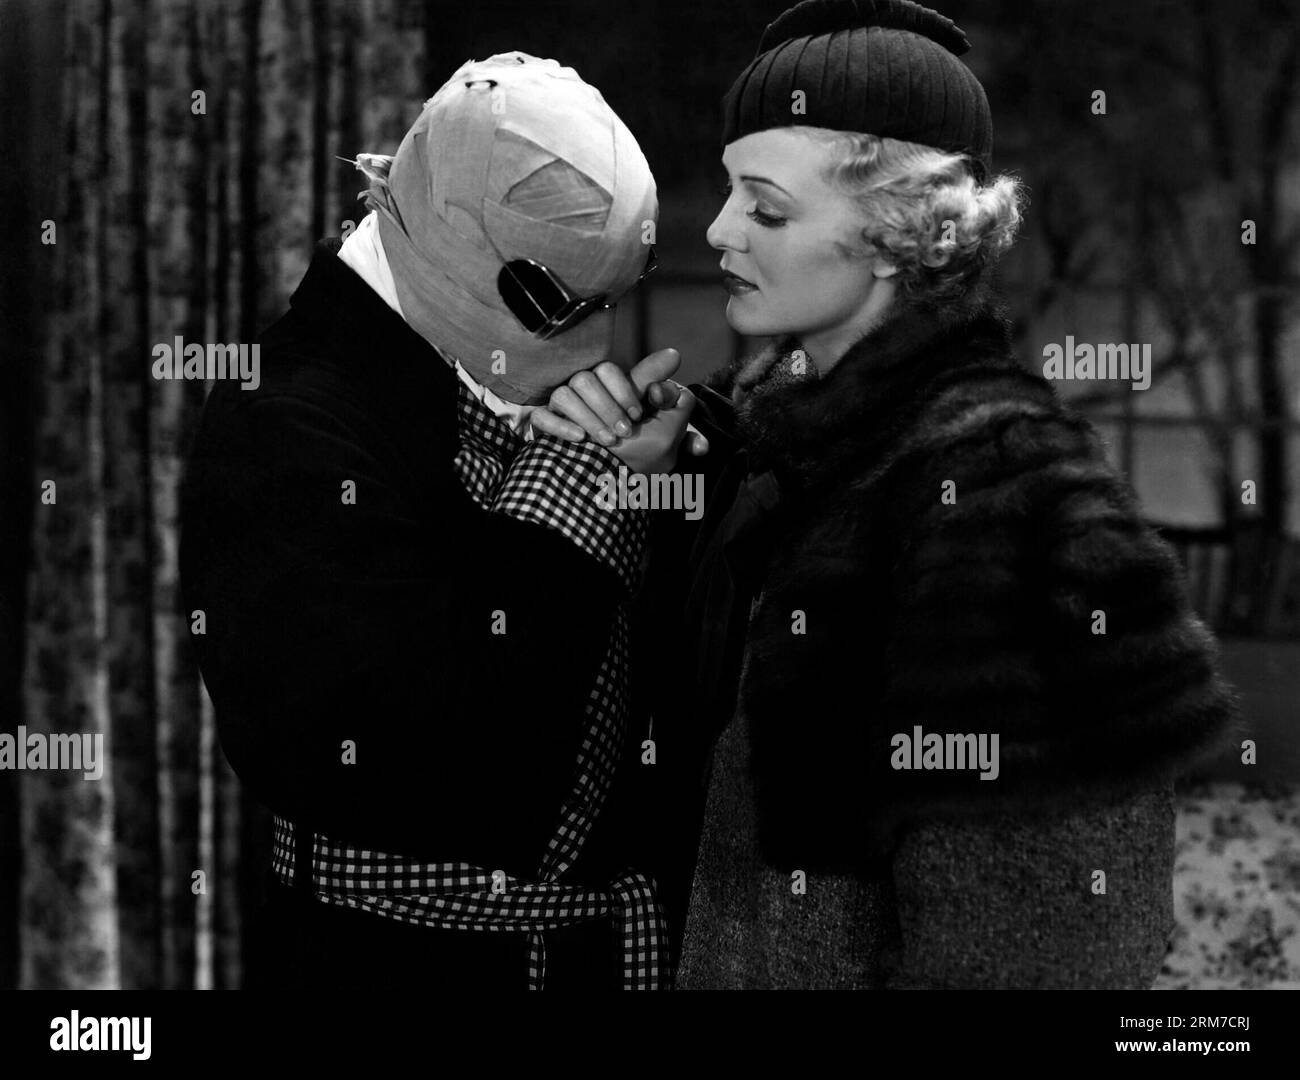 GLORIA STUART and CLAUDE RAINS in THE INVISIBLE MAN (1933), directed by JAMES WHALE. Credit: UNIVERSAL PICTURES / Album Stock Photo